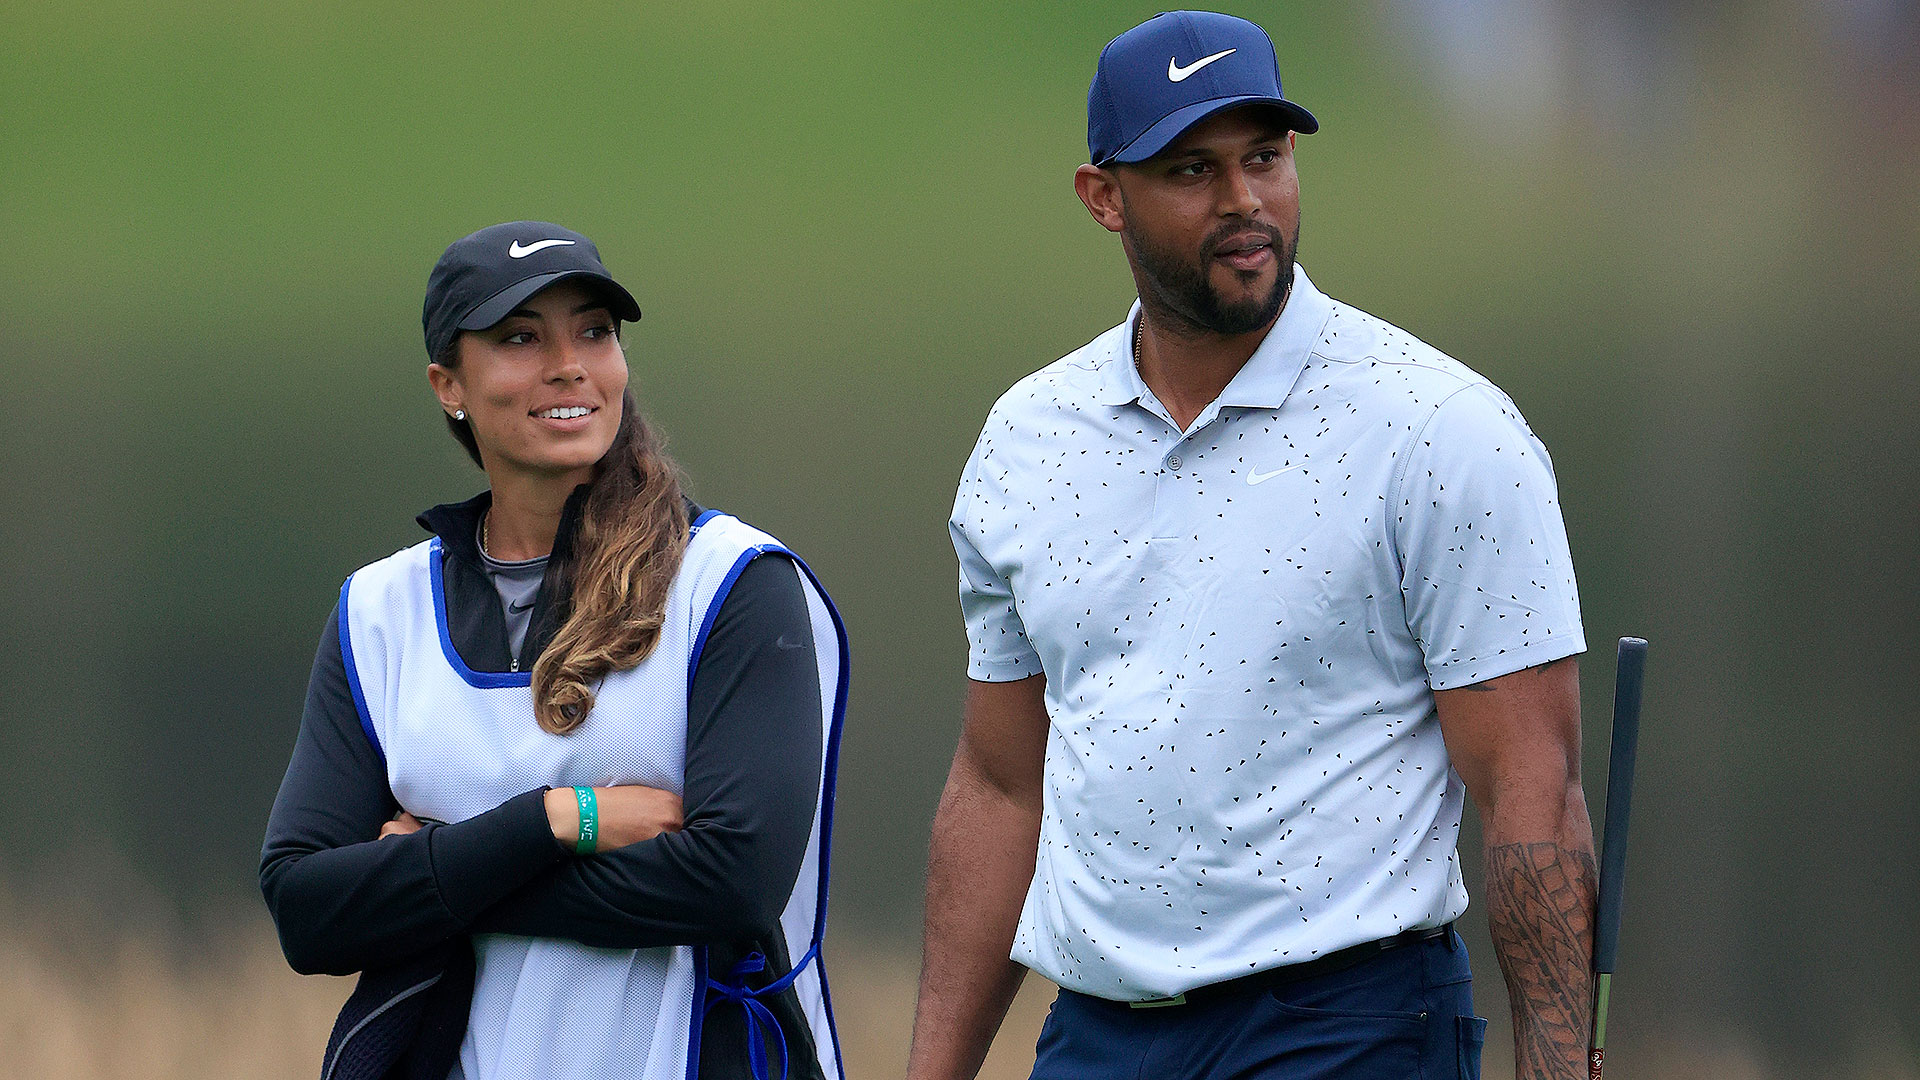 Cheyenne Woods announces engagement to Yankees outfielder Aaron Hicks